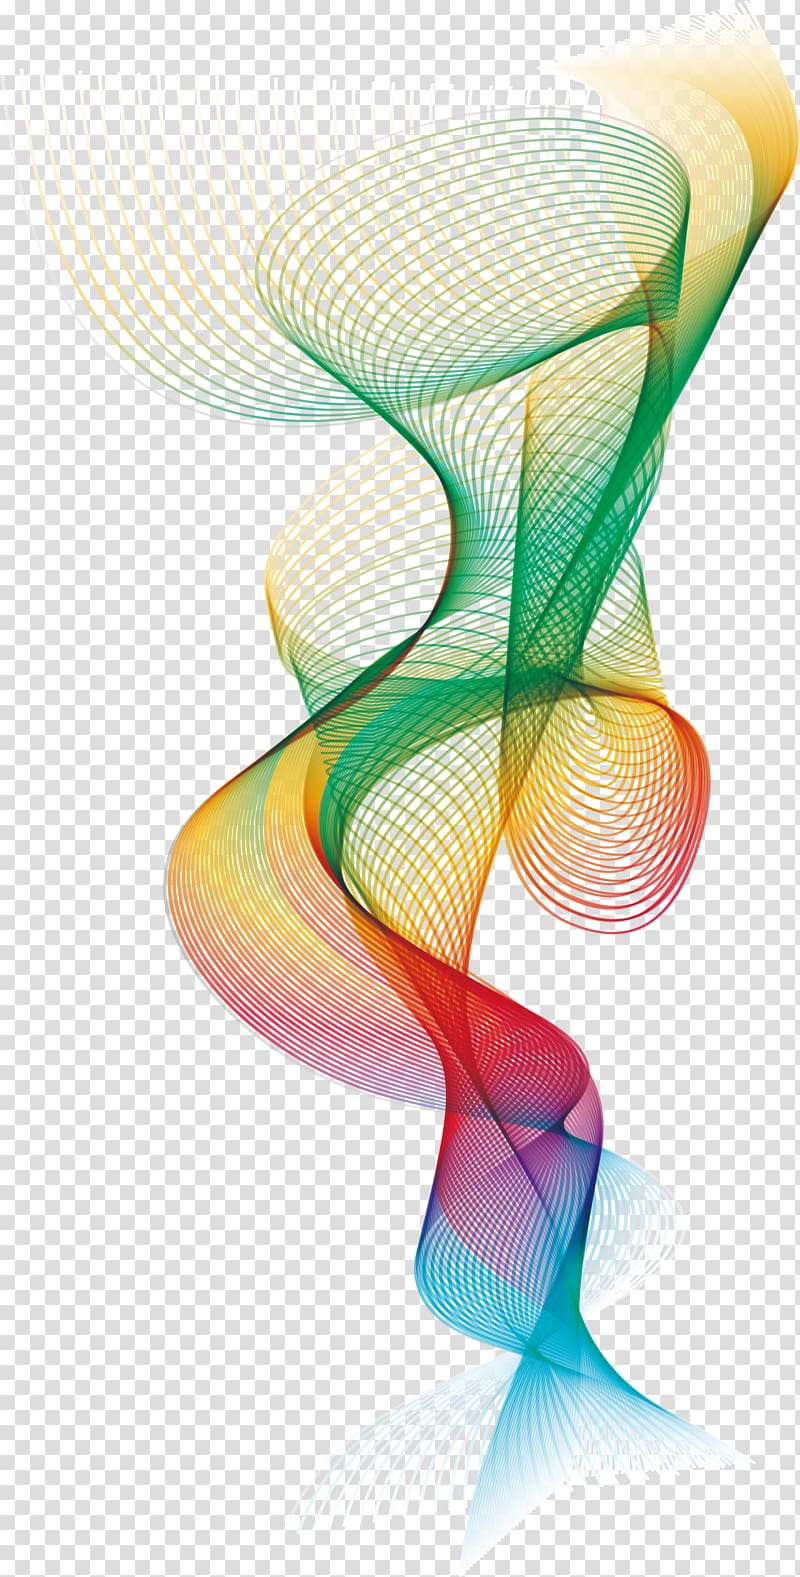 green, yellow, and red spiral illustration, Art Line, Artistic feeling, colorful lines transparent background PNG clipart